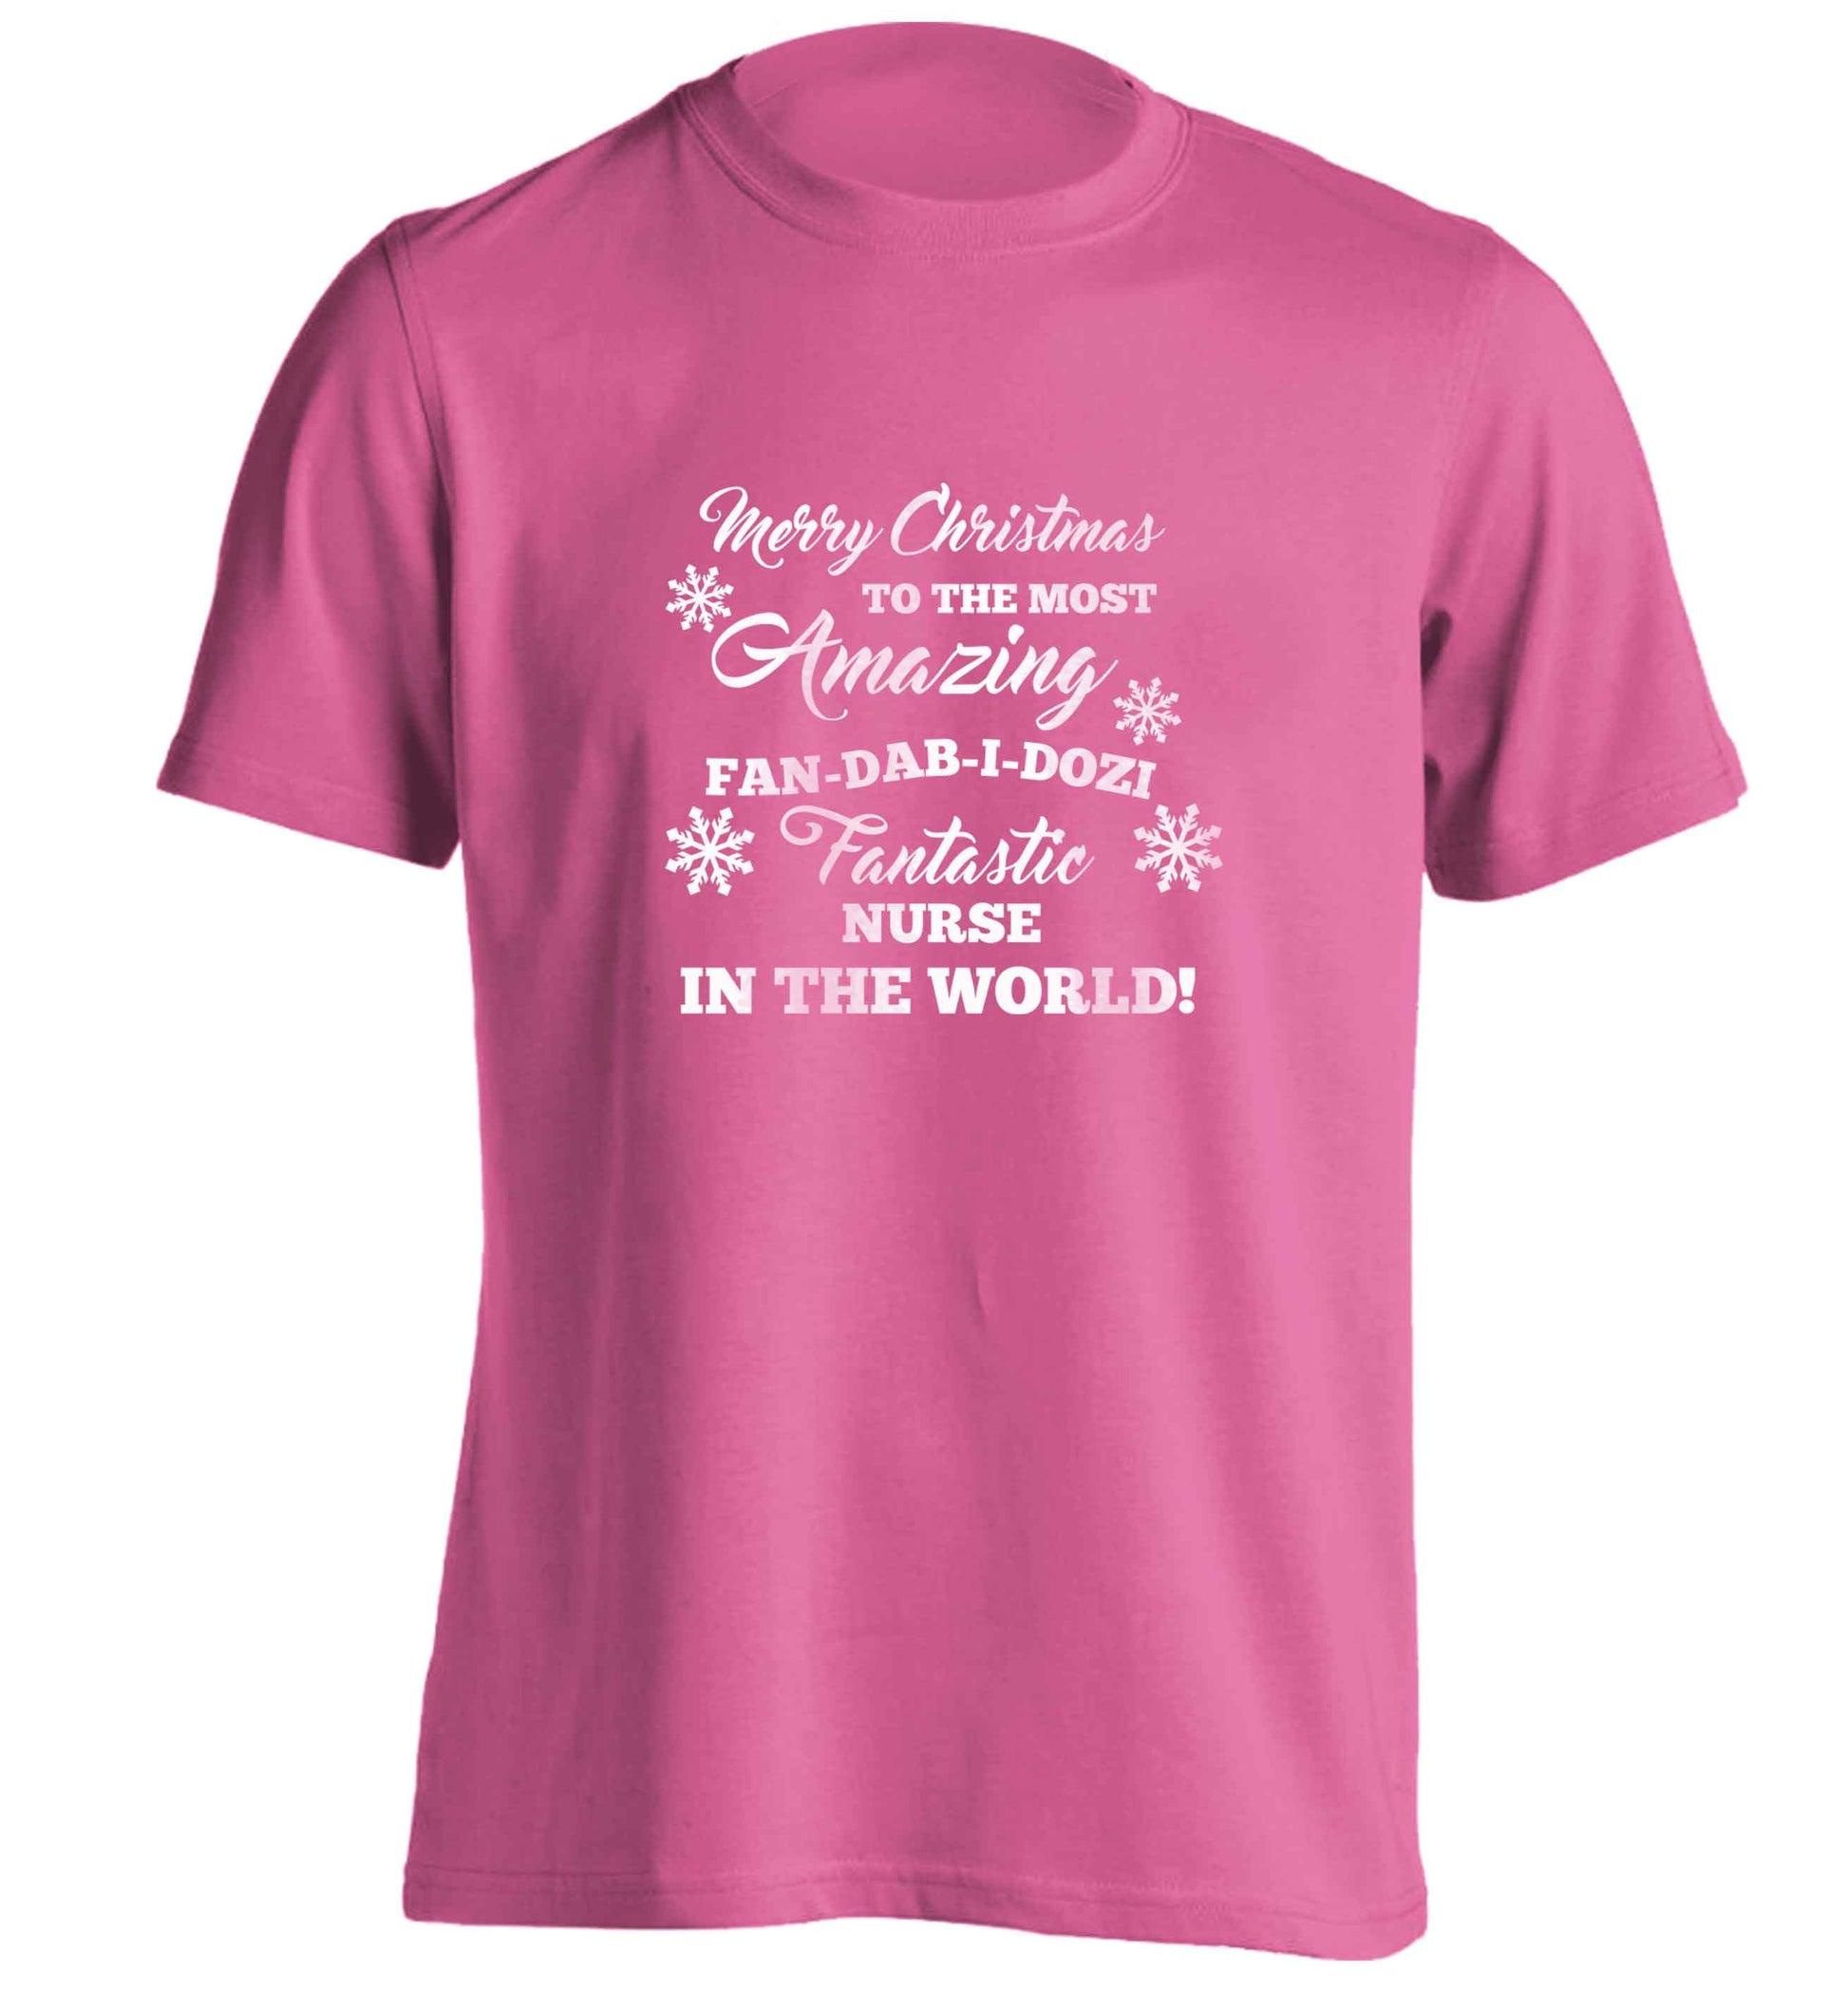 Merry Christmas to the most amazing nurse in the world! adults unisex pink Tshirt 2XL